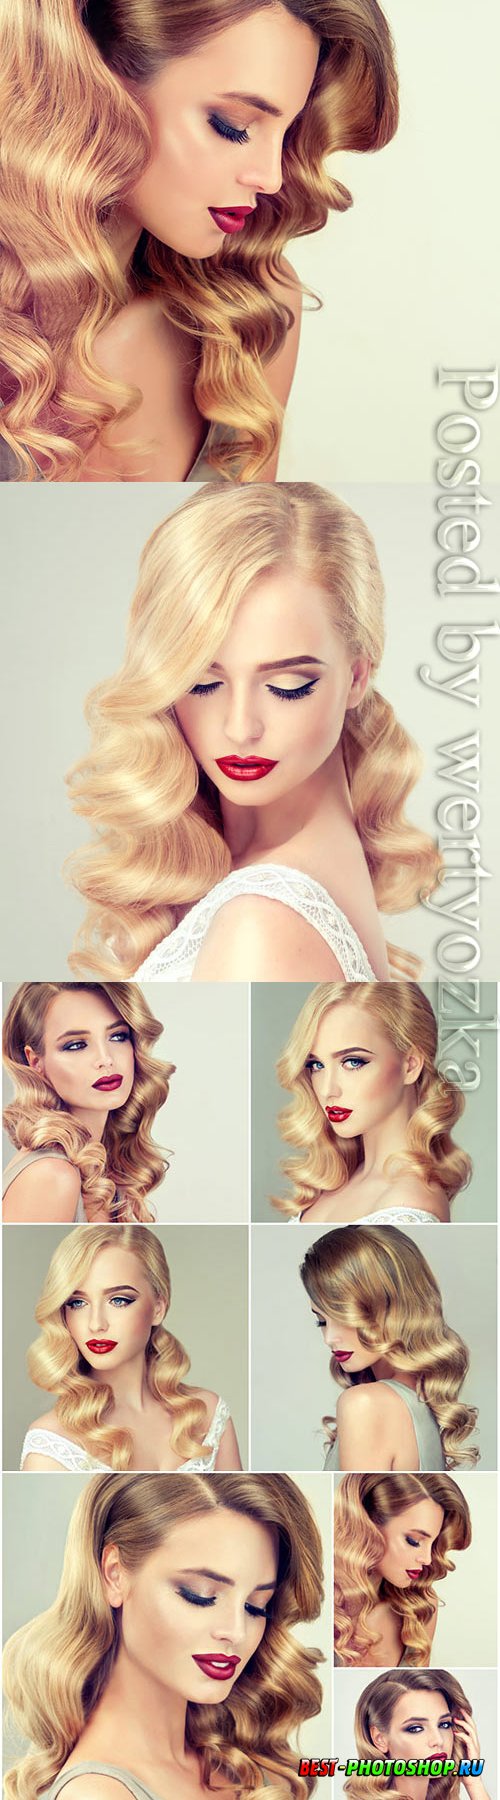 Lovely blonde girl with beautiful hair stock photo